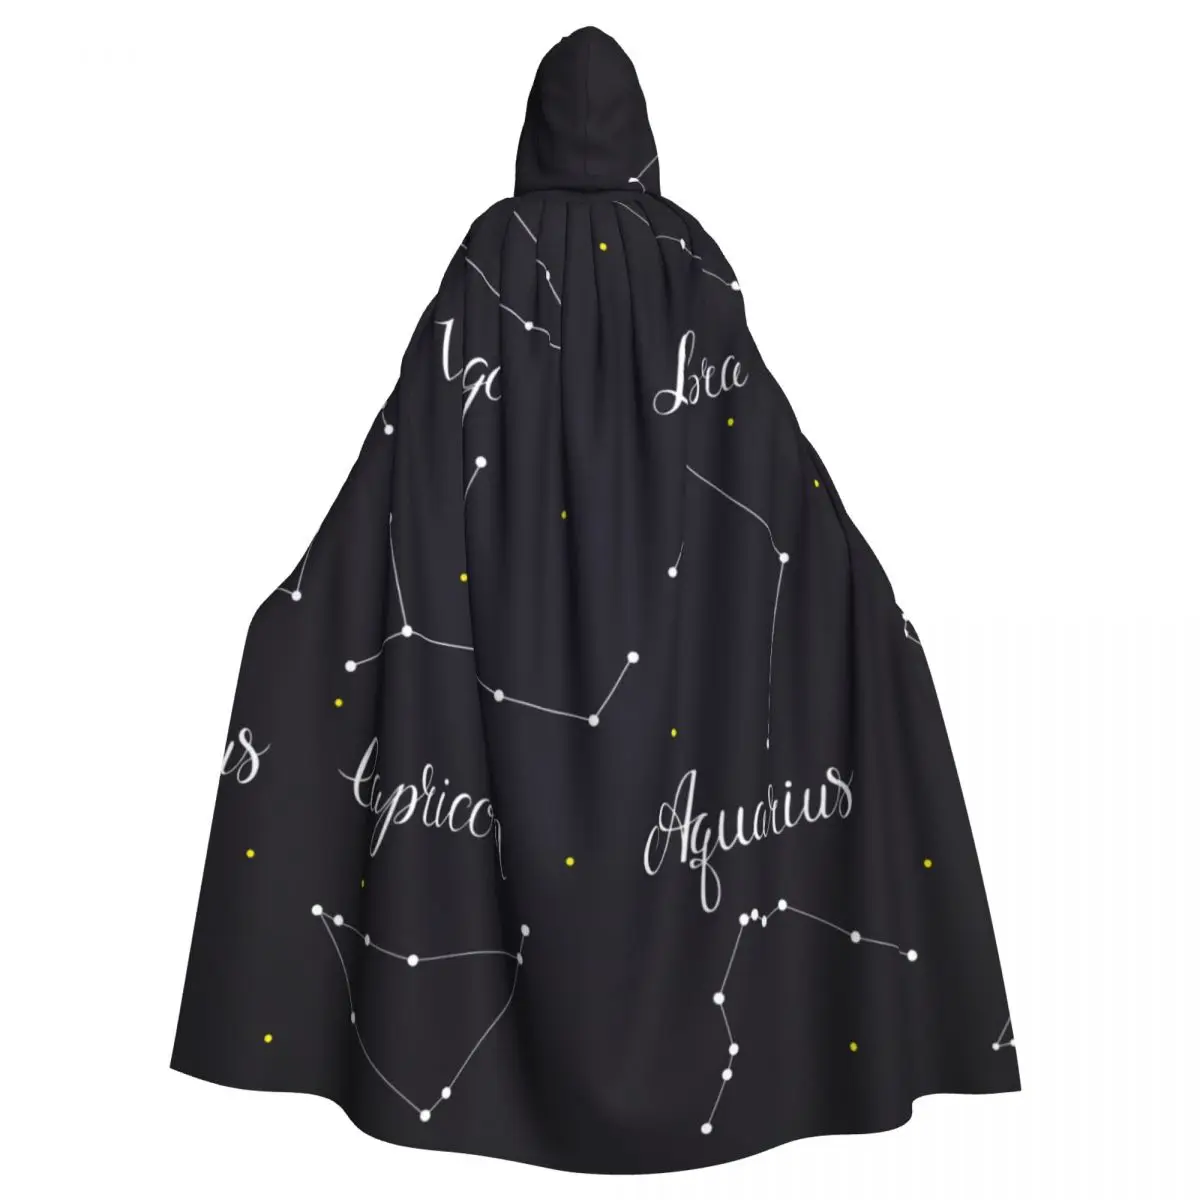 

Zodiac Constellations Set Hooded Cloak Polyester Unisex Witch Cape Costume Accessory